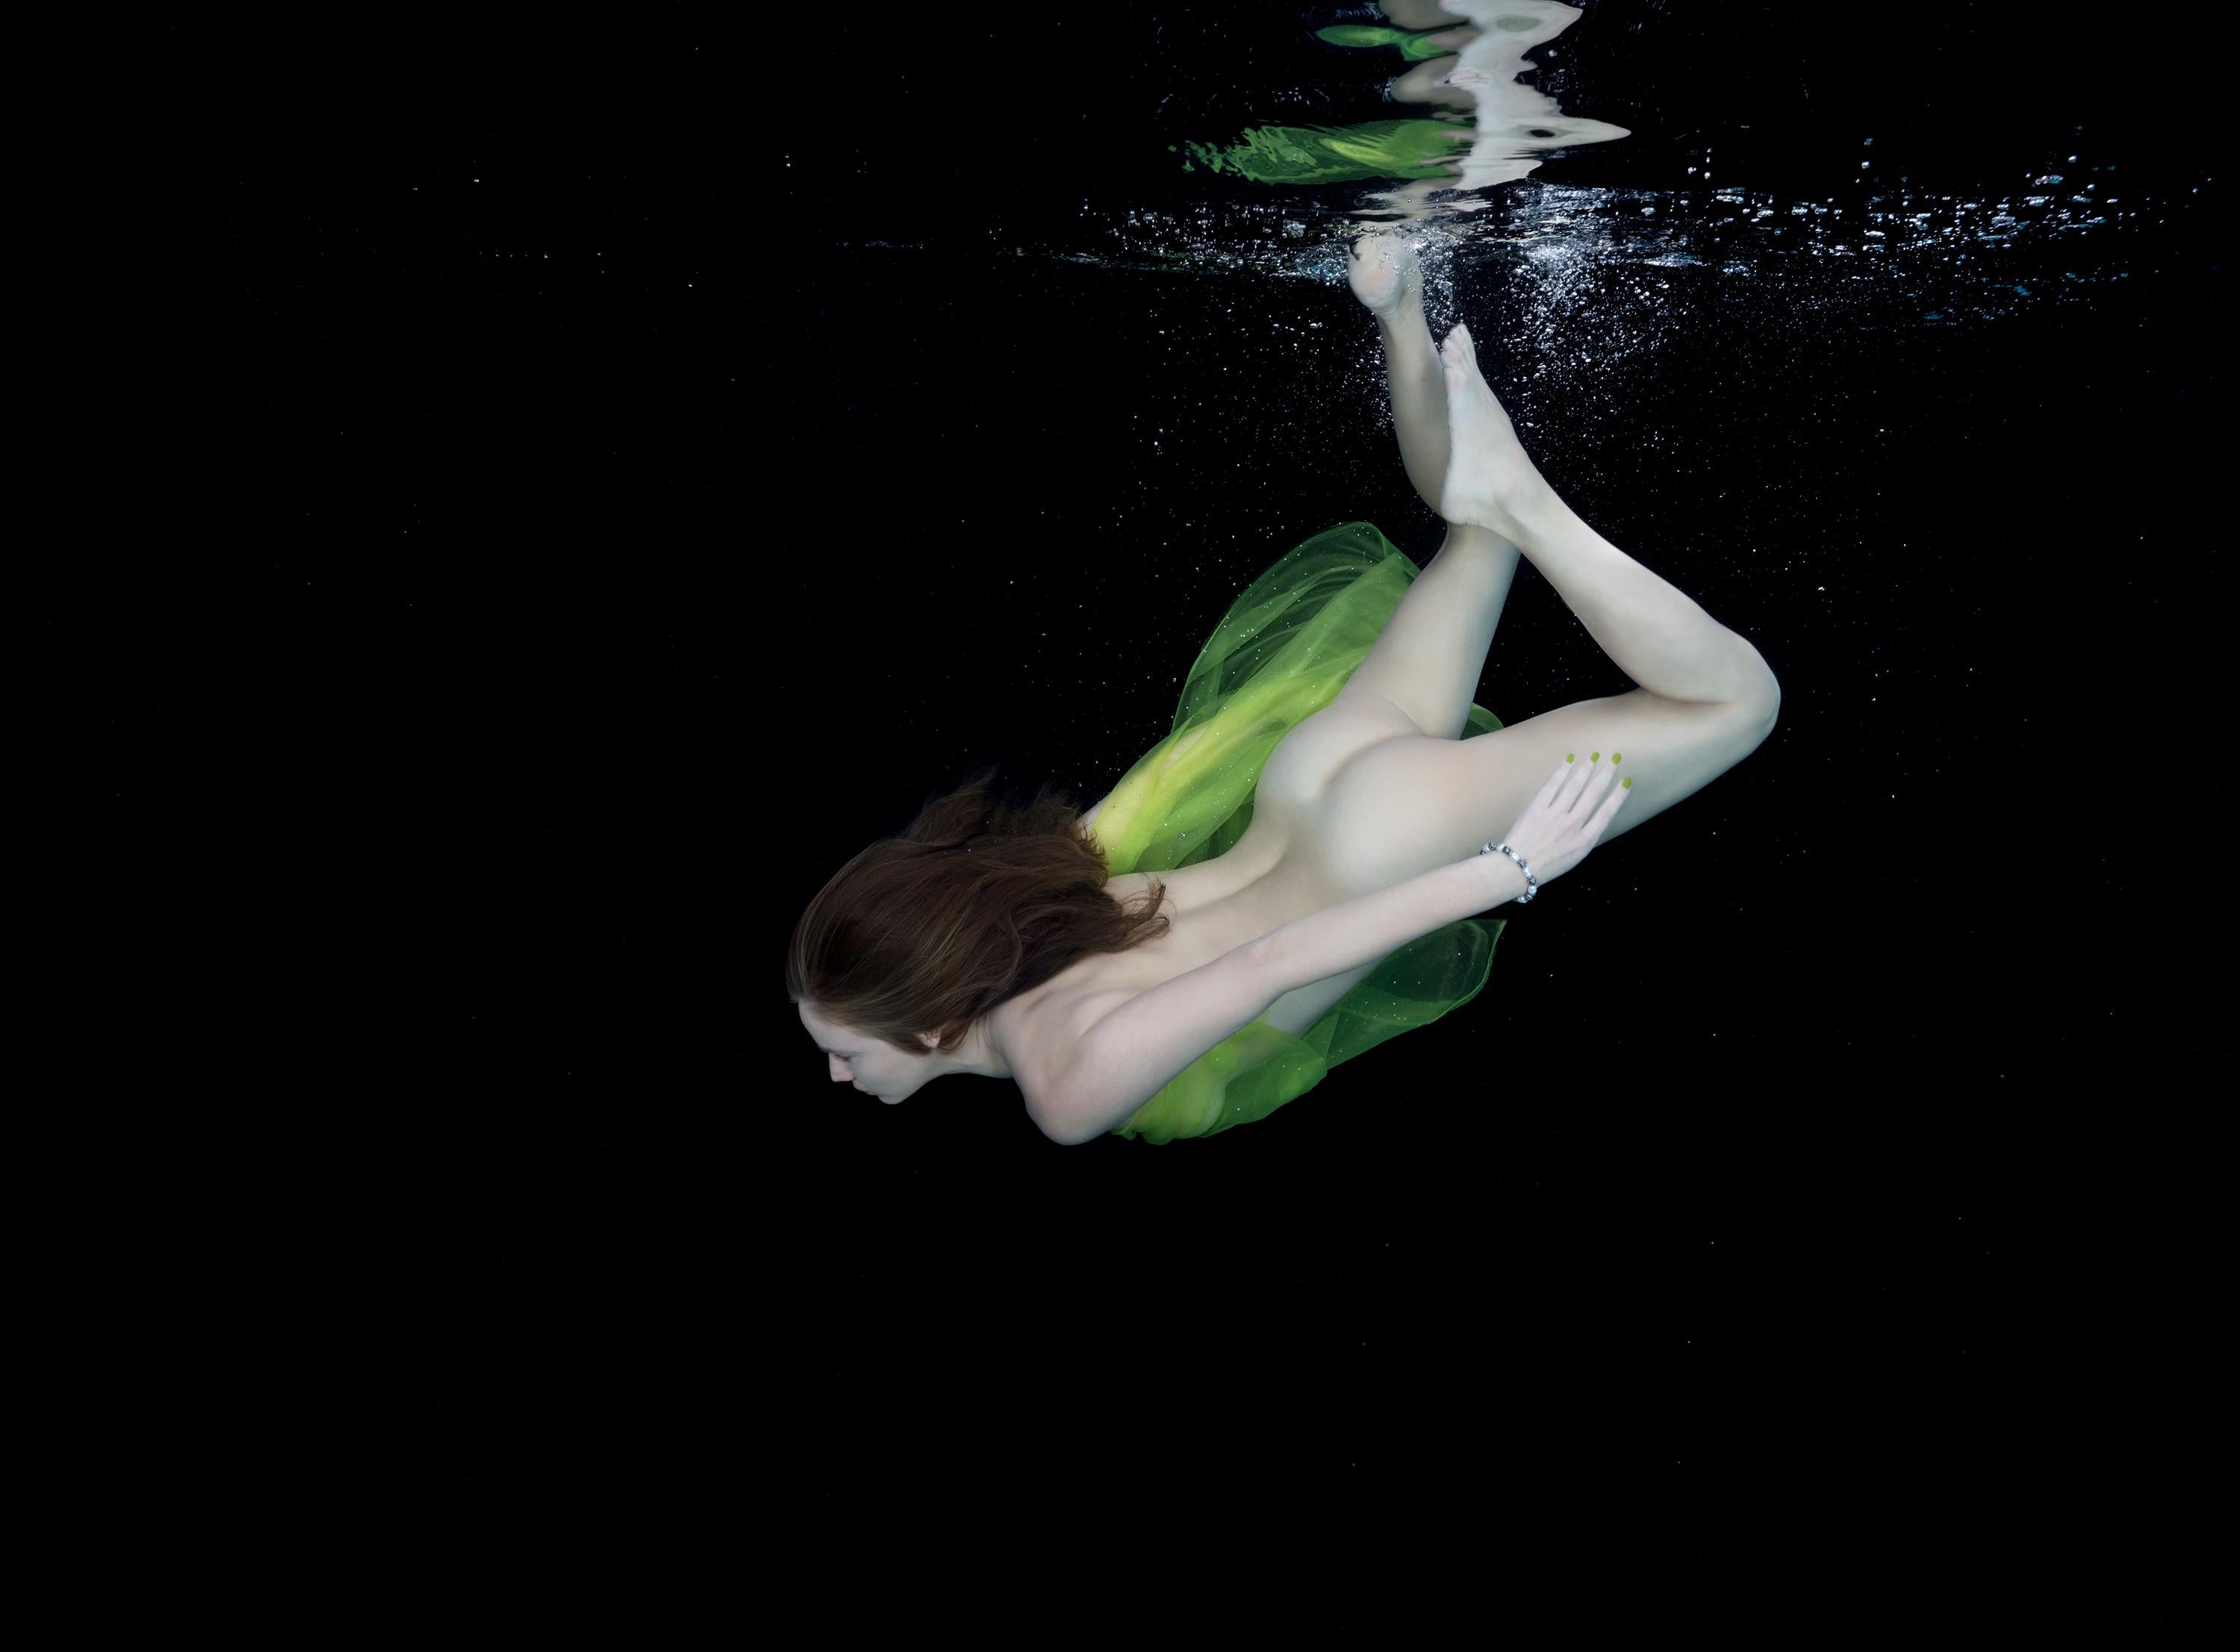 Alex Sher Nude Photograph - Green Breath - underwater nude photograph - archival pigment print 18" x 24"